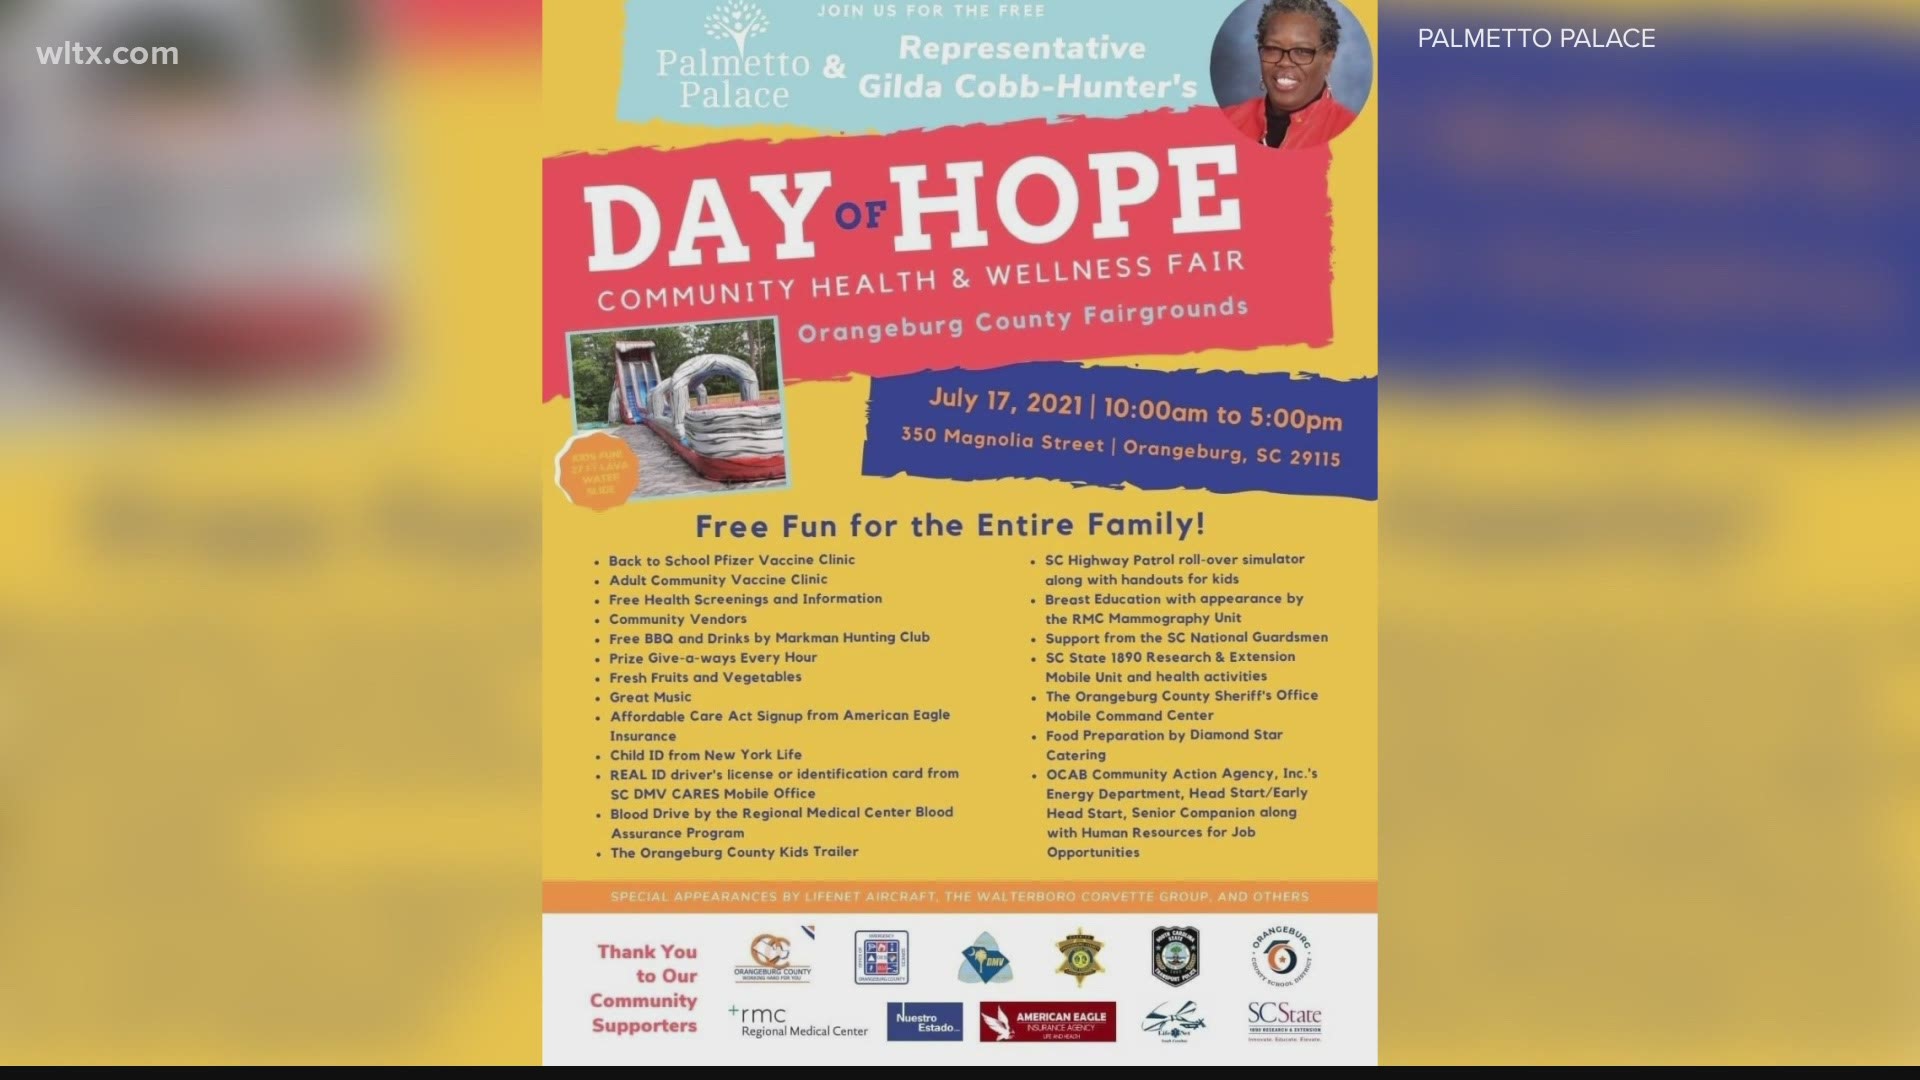 Calling it the 'Day of Hope' is hosted by Palmetto Palace a North Charleston based mobile non-profit to provide rural access to health services.